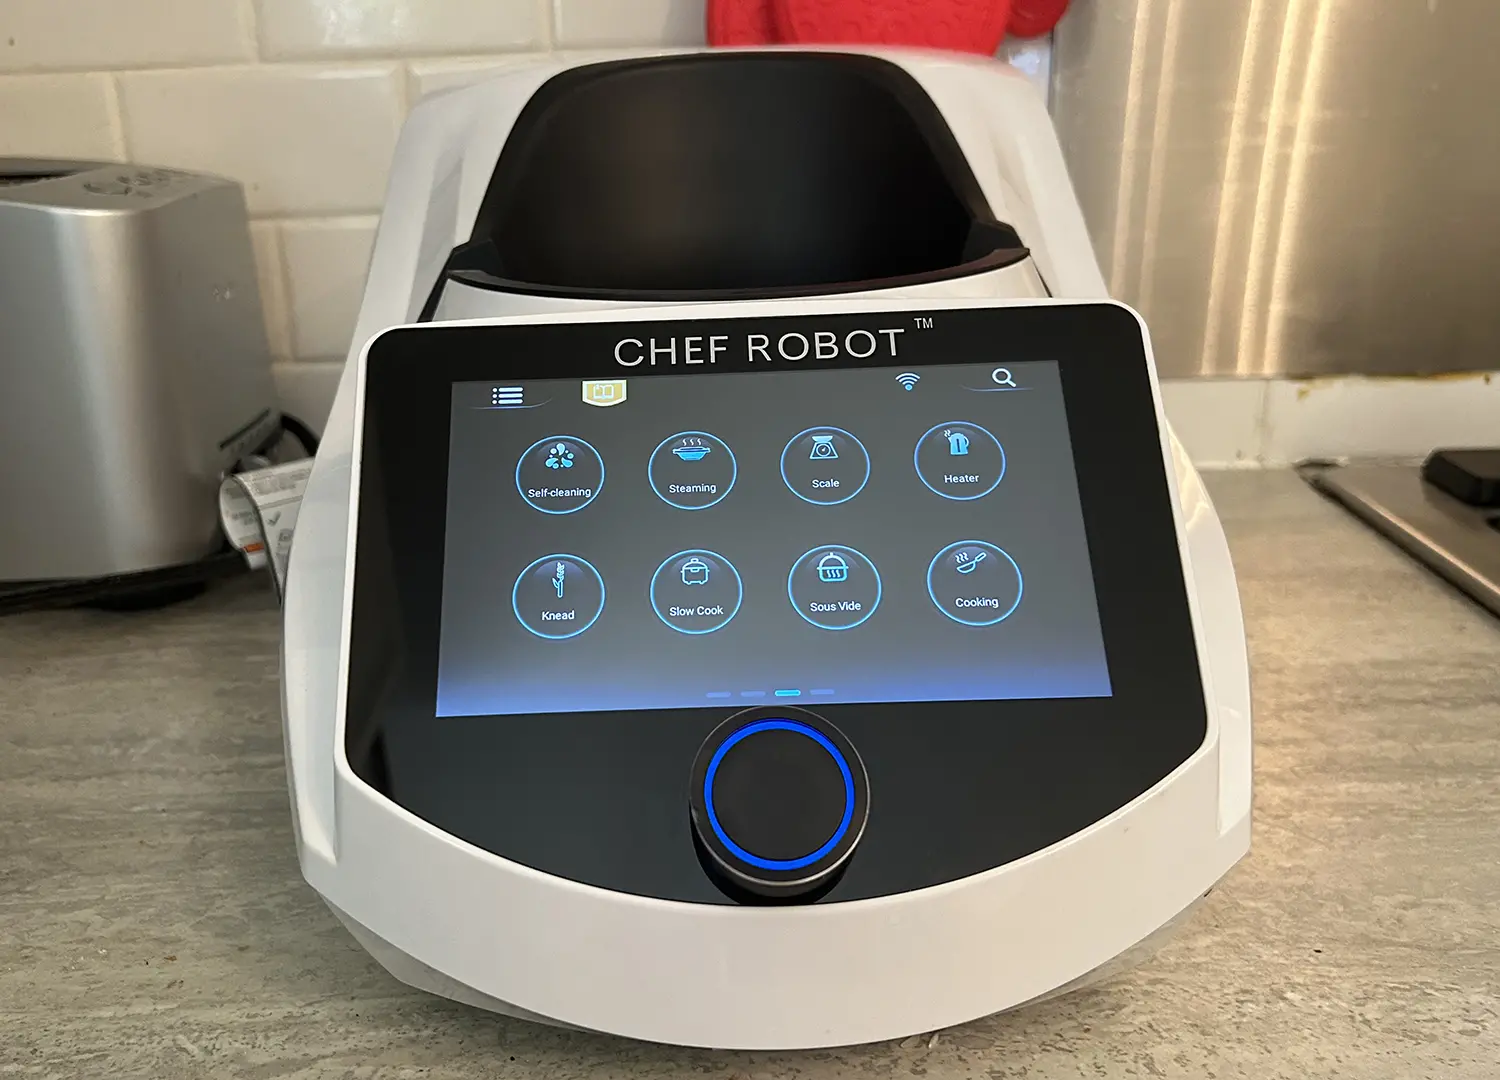 Chef Robot cooking mode buttons